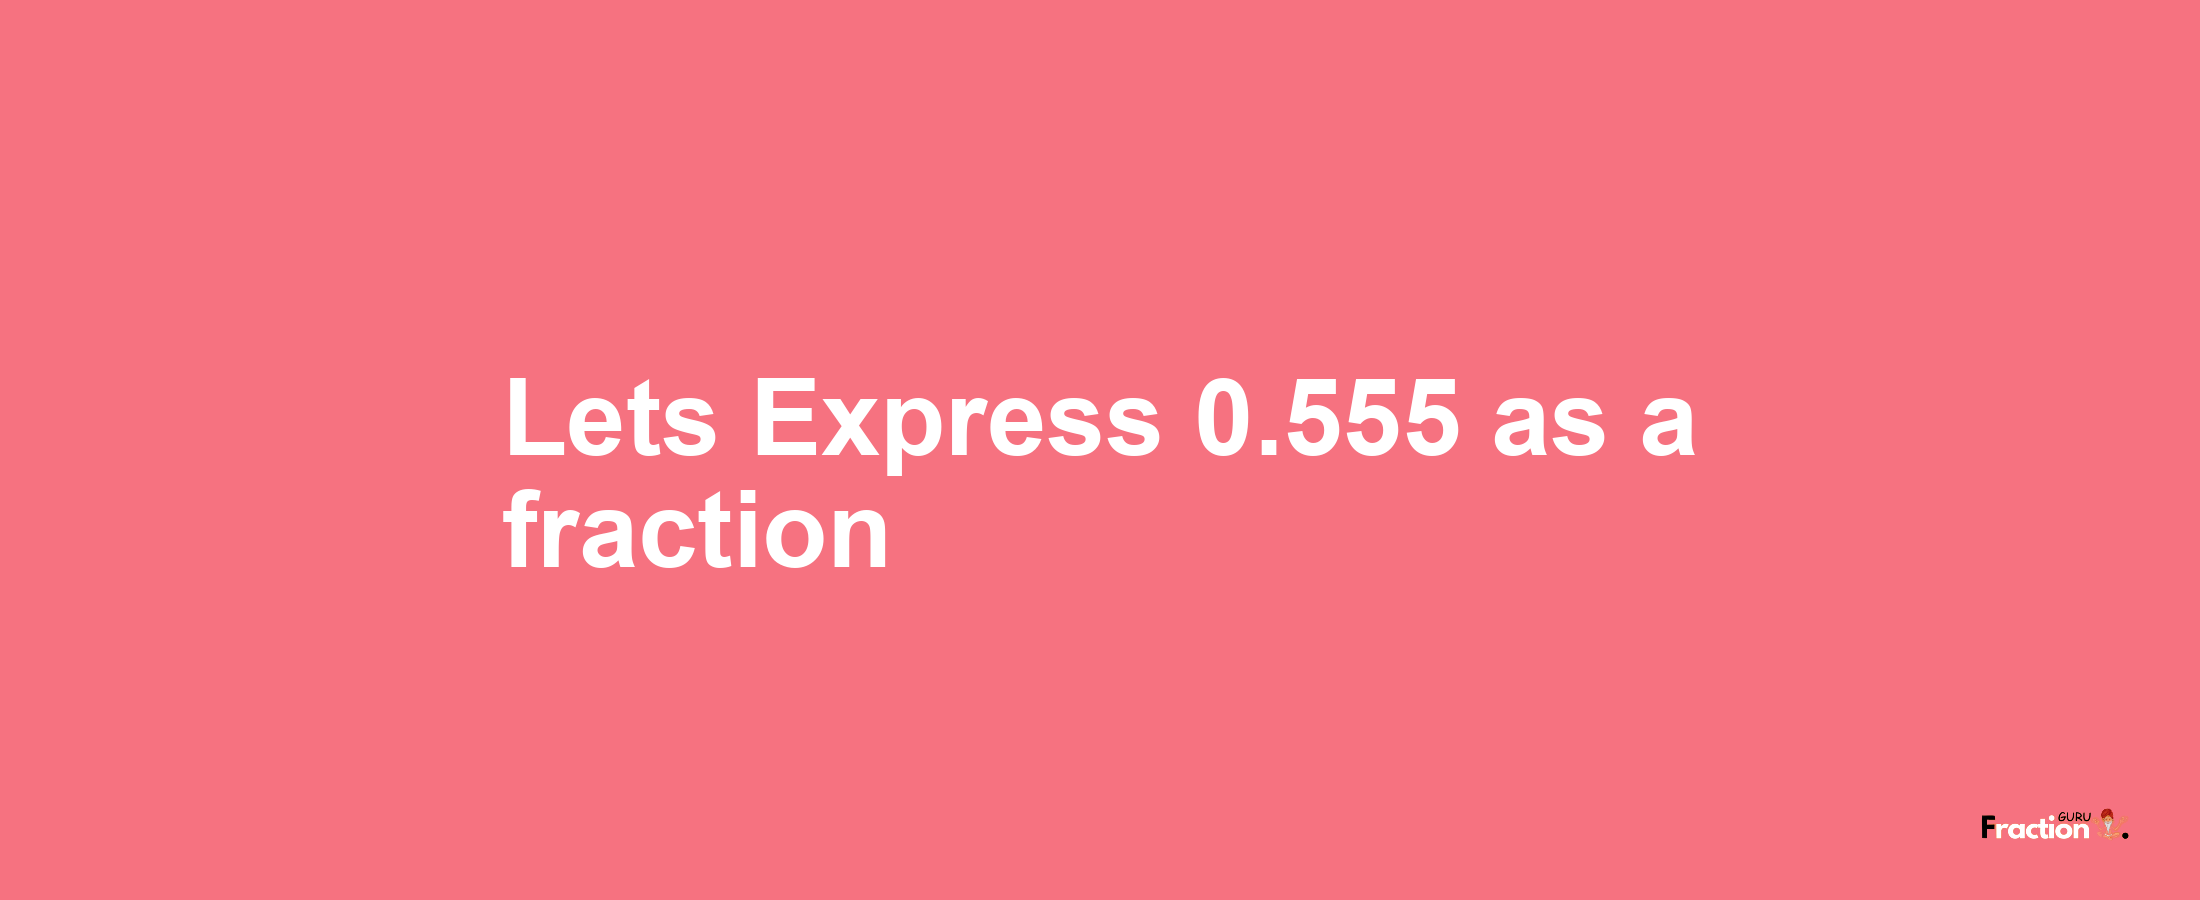 Lets Express 0.555 as afraction